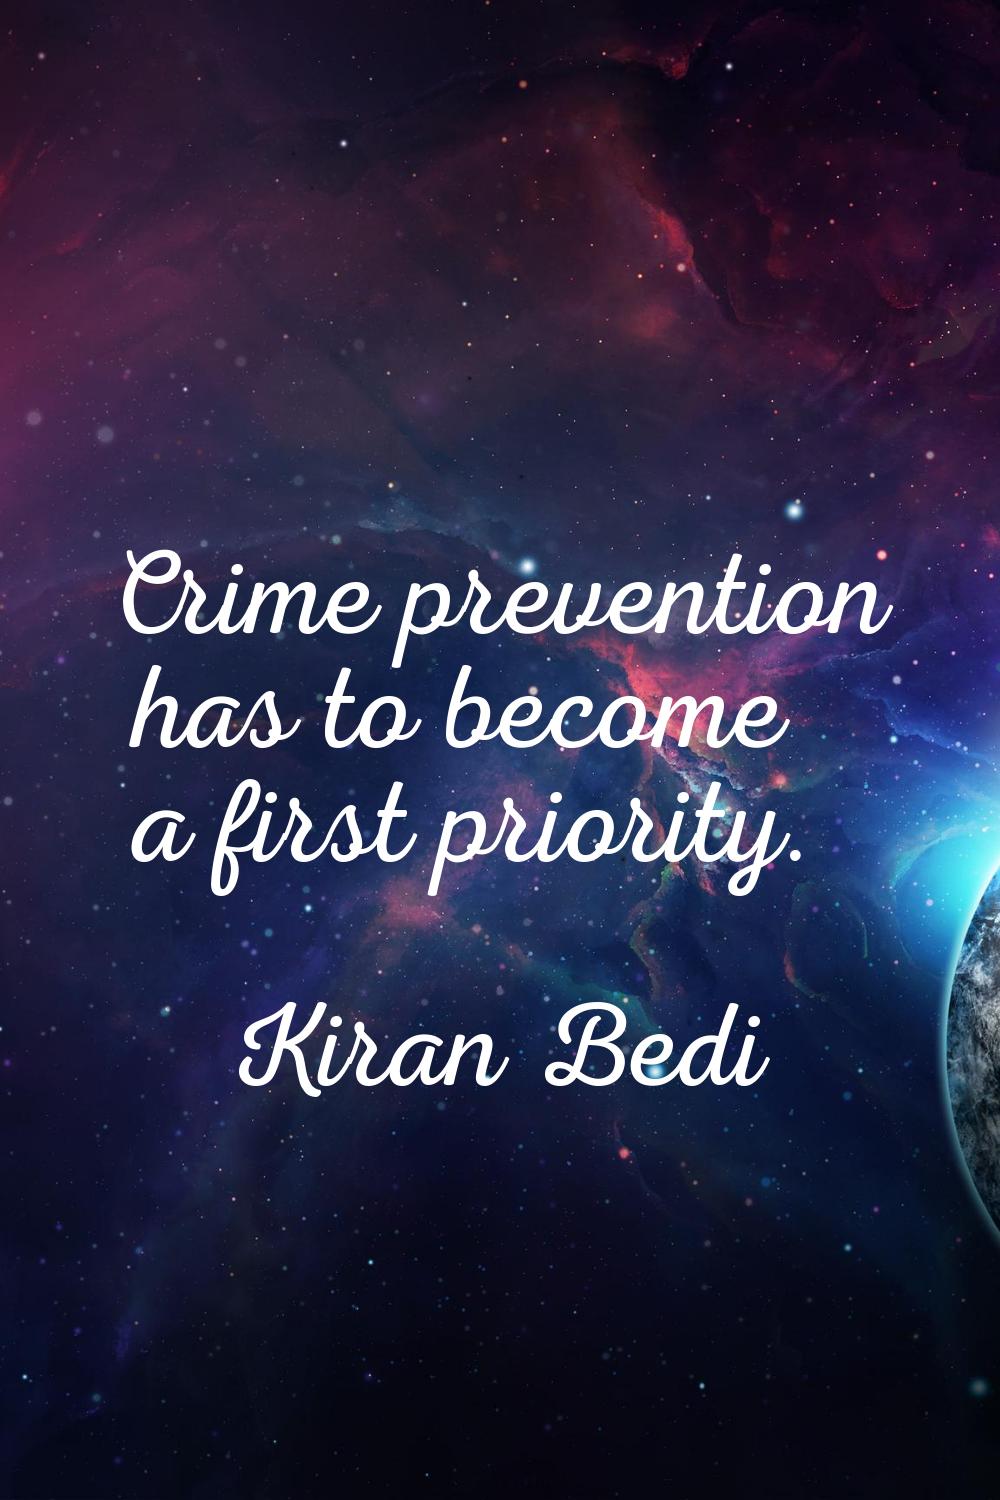 Crime prevention has to become a first priority.